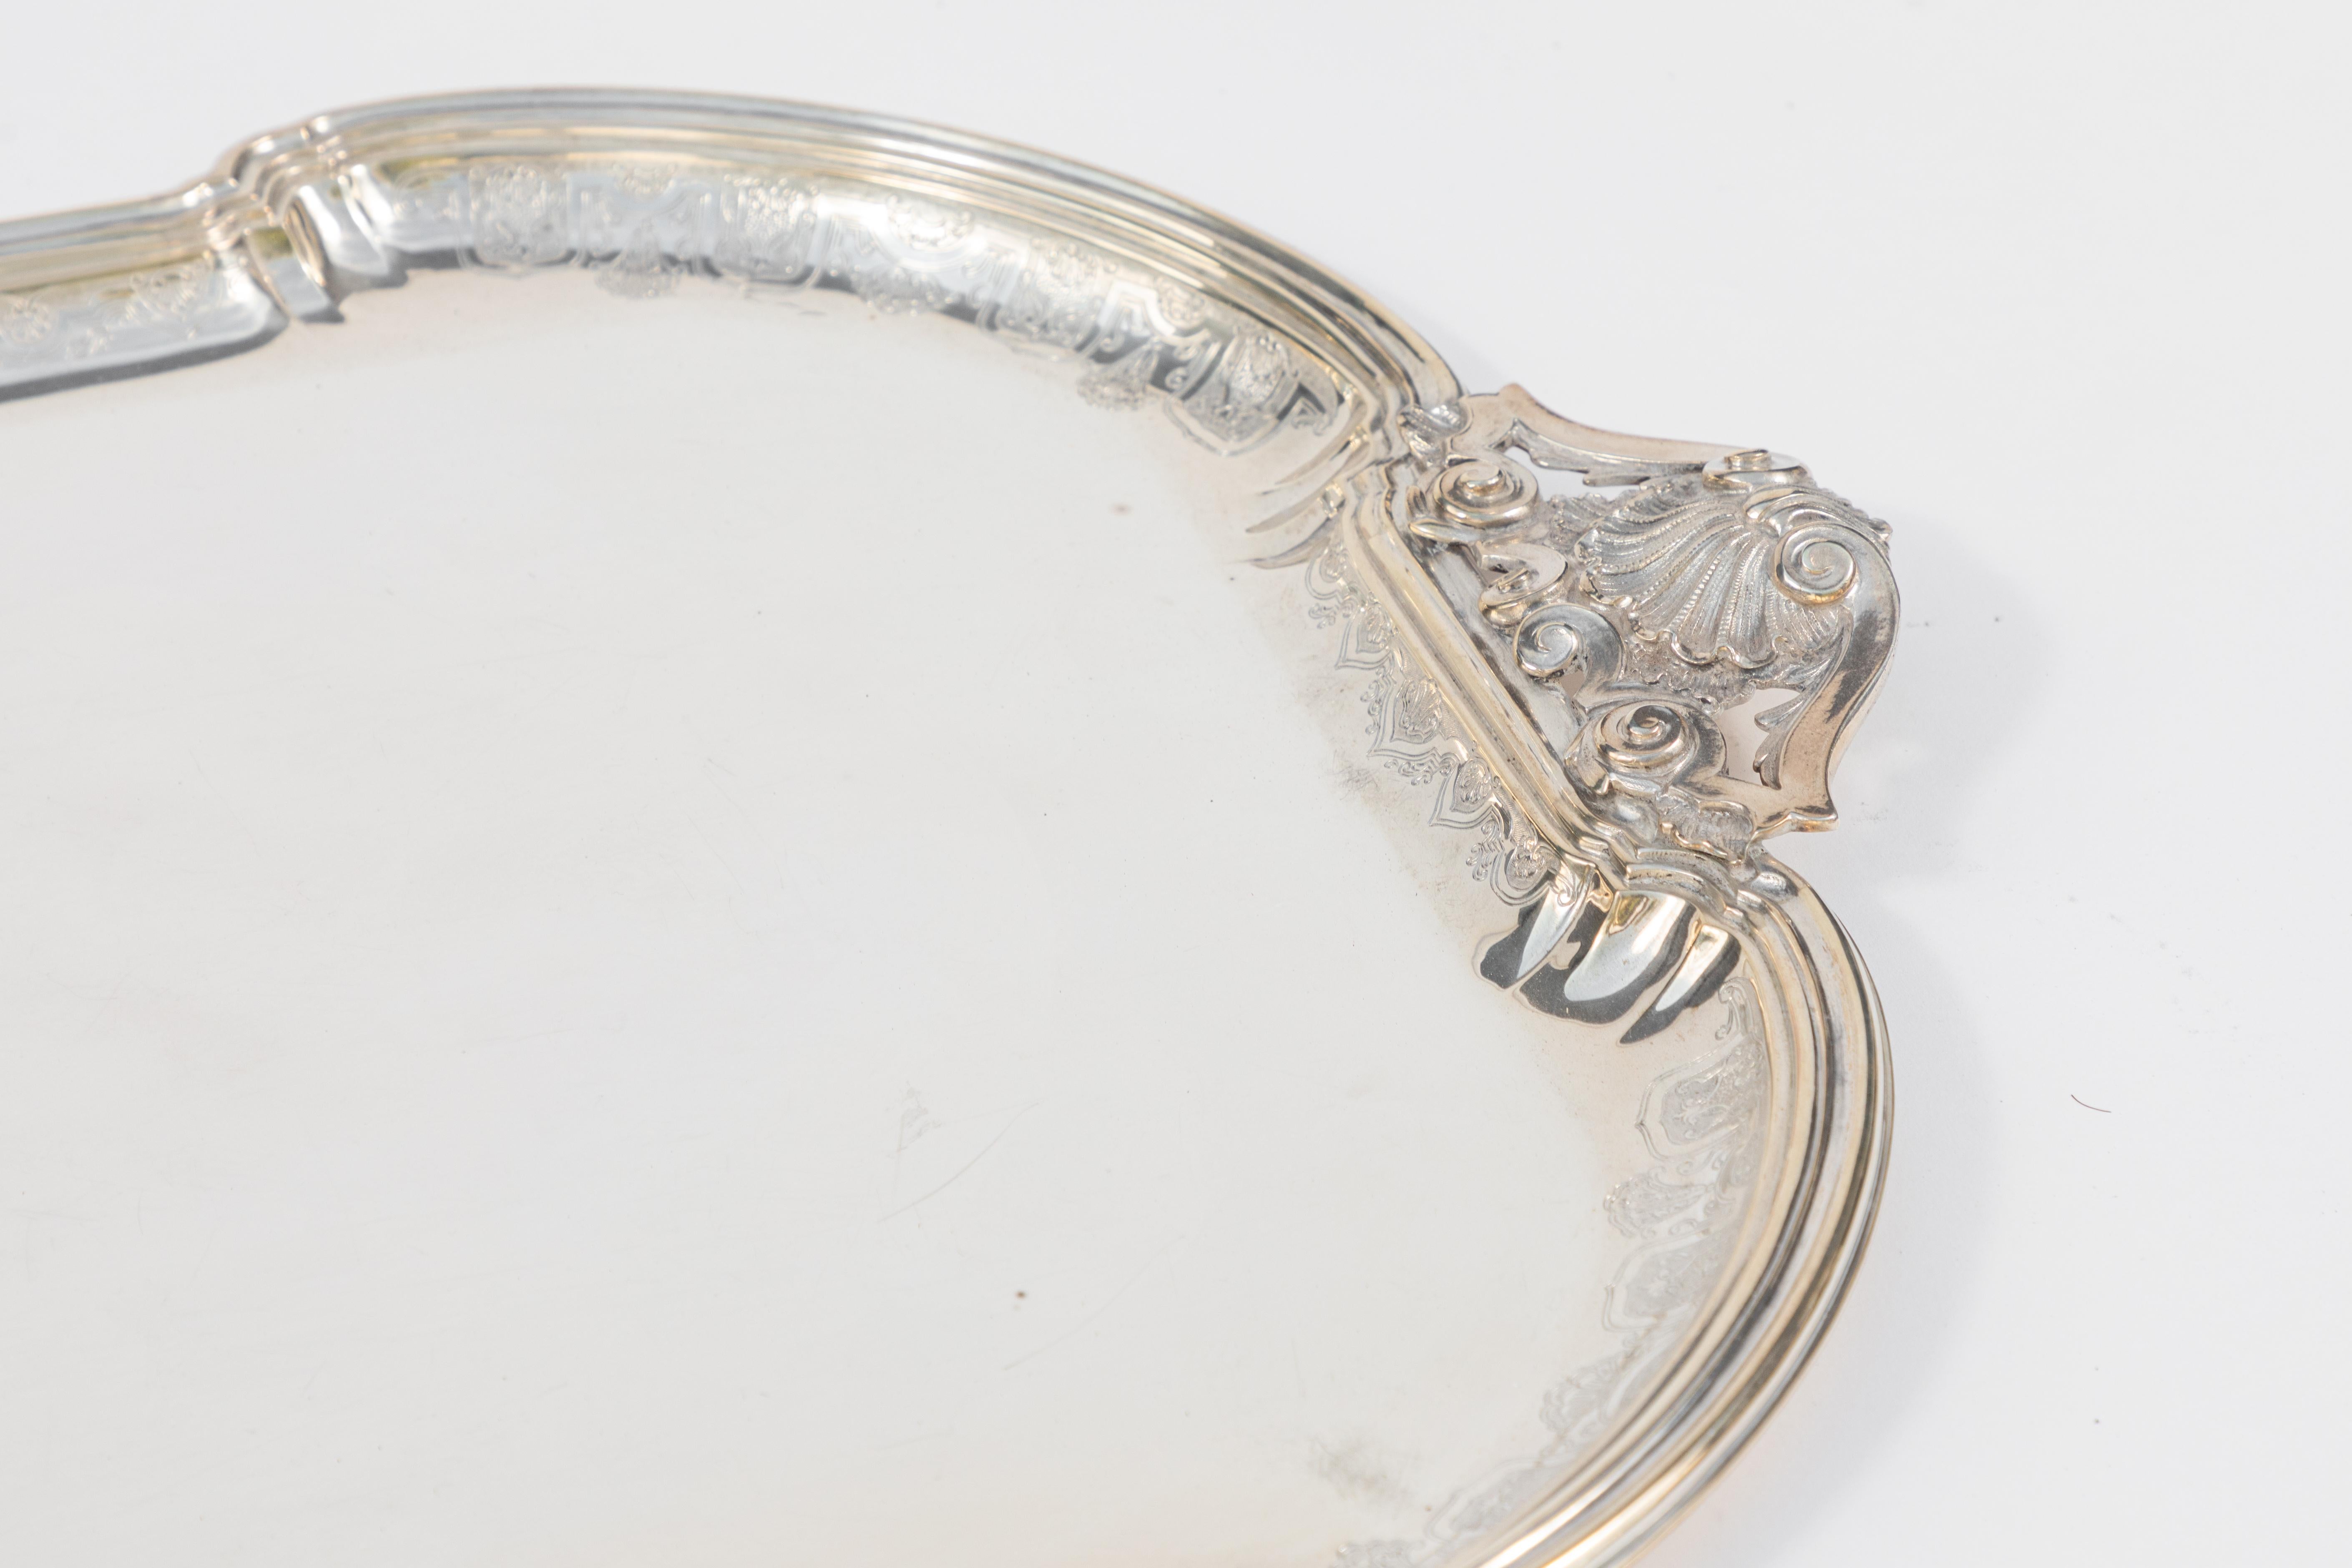 Early 20th century Mario Buccellati sterling silver tray. Signed and hallmarked.
121.35 oz.